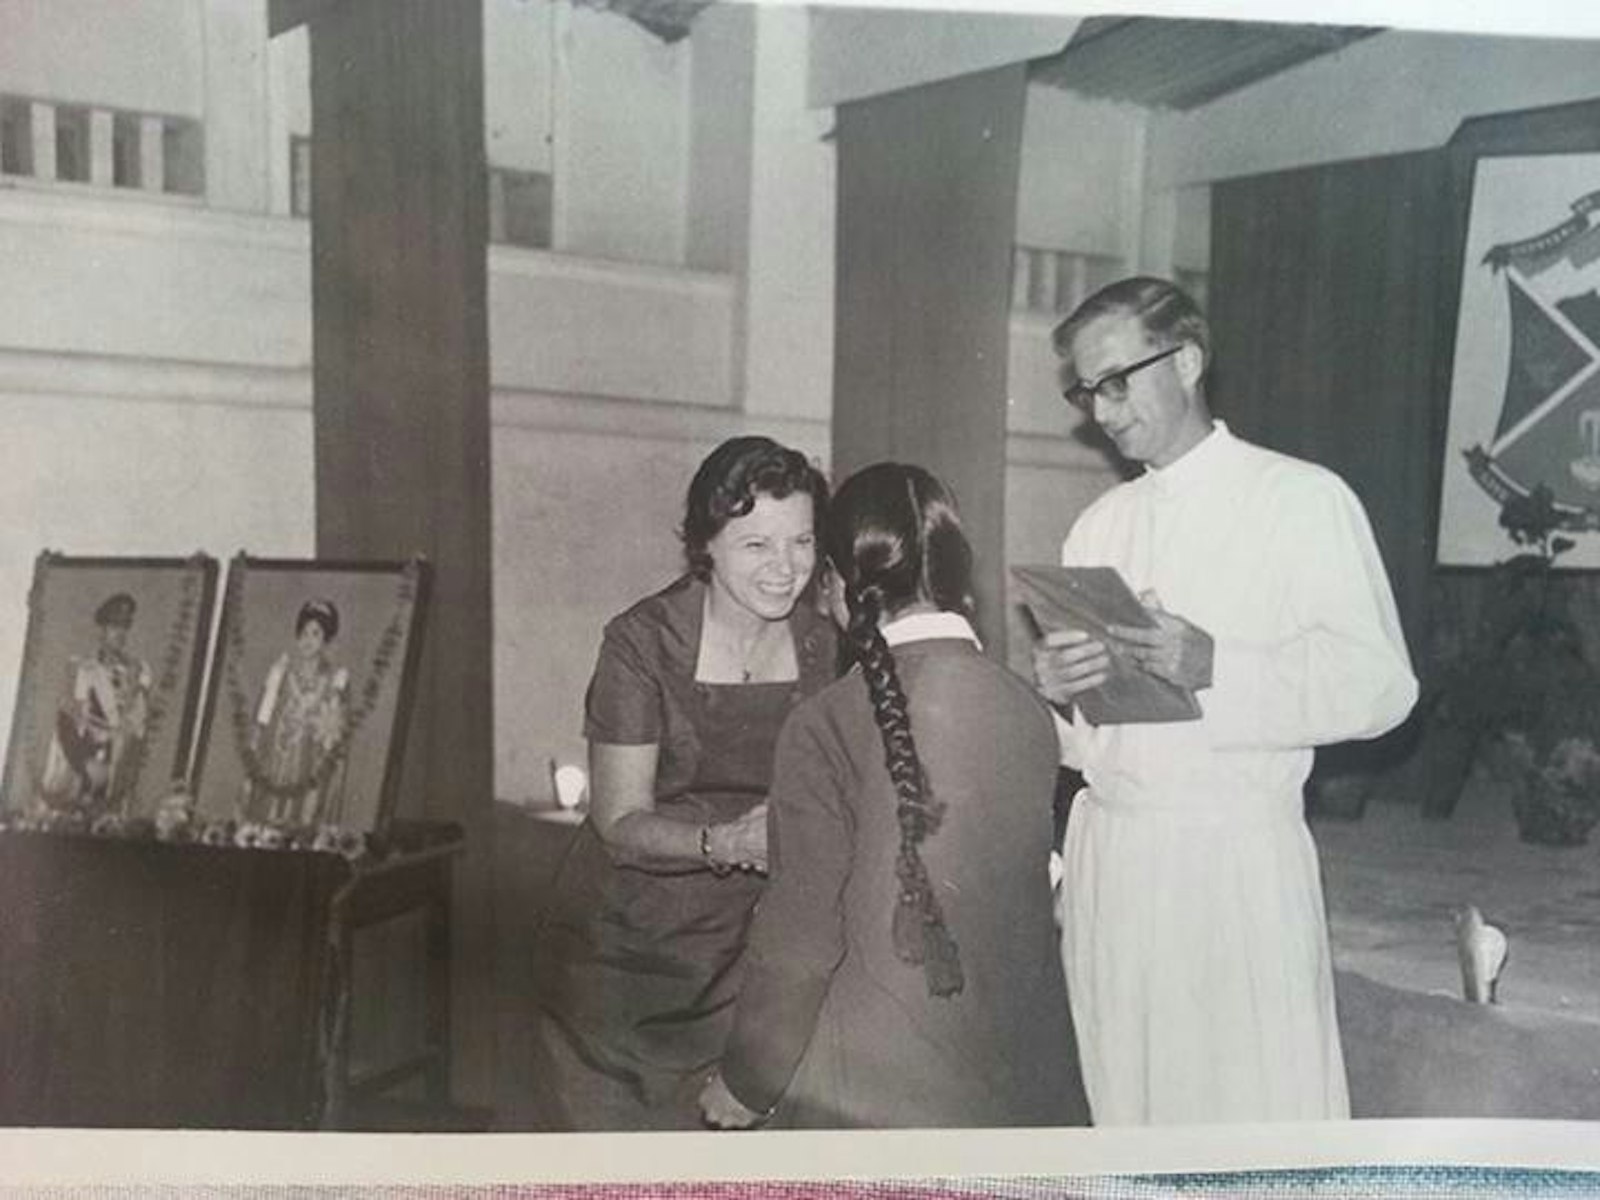 A young Fr. Cachat in 1975, then principal of St. Xavier's School in Jawalakhel, hands out awards to students.